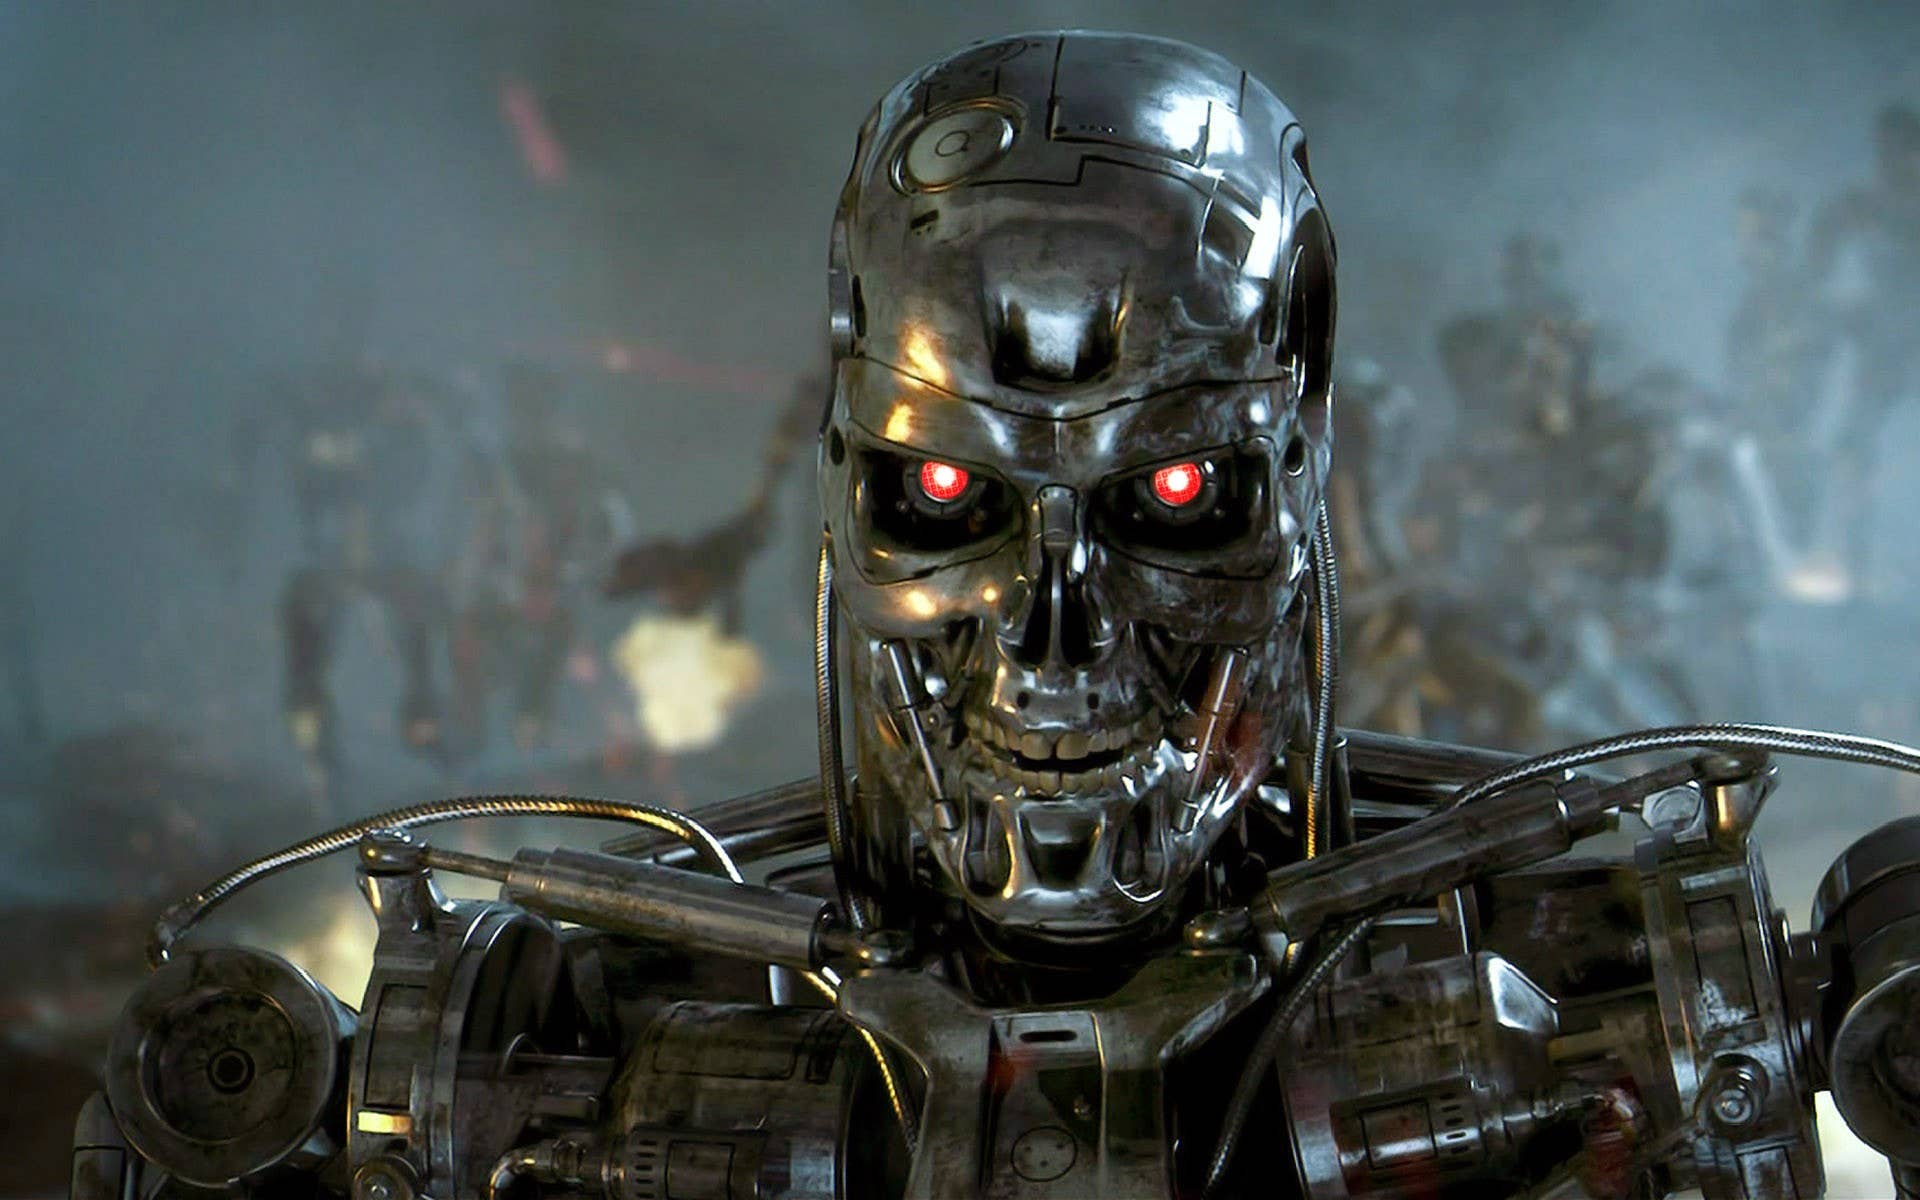 It's official: That new Terminator movie is a reboot AND a trilogy